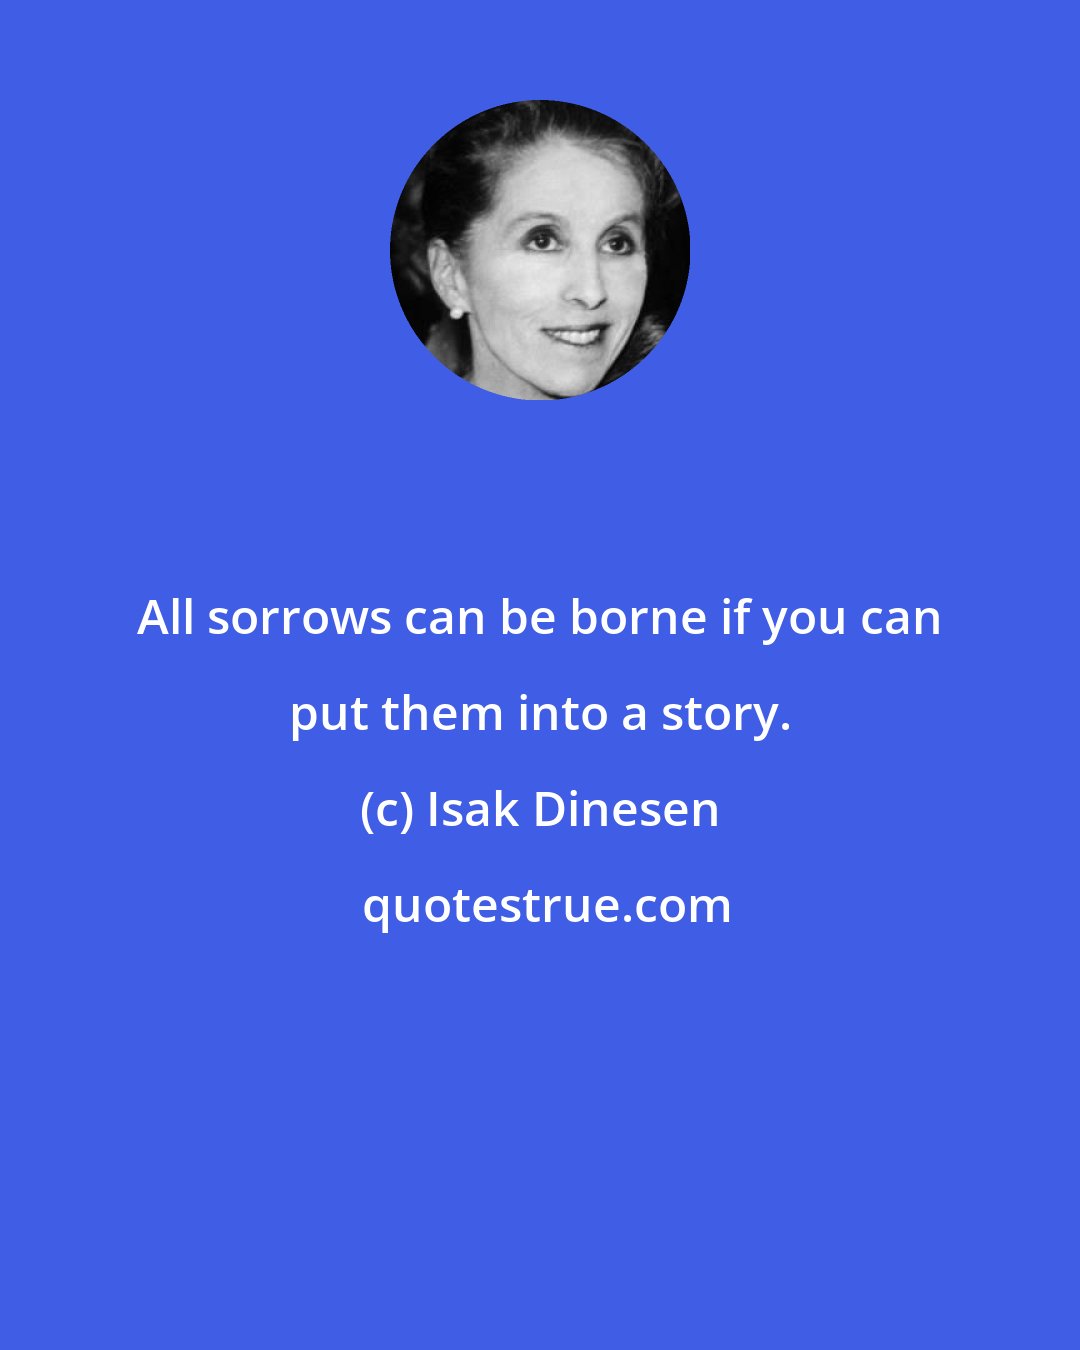 Isak Dinesen: All sorrows can be borne if you can put them into a story.